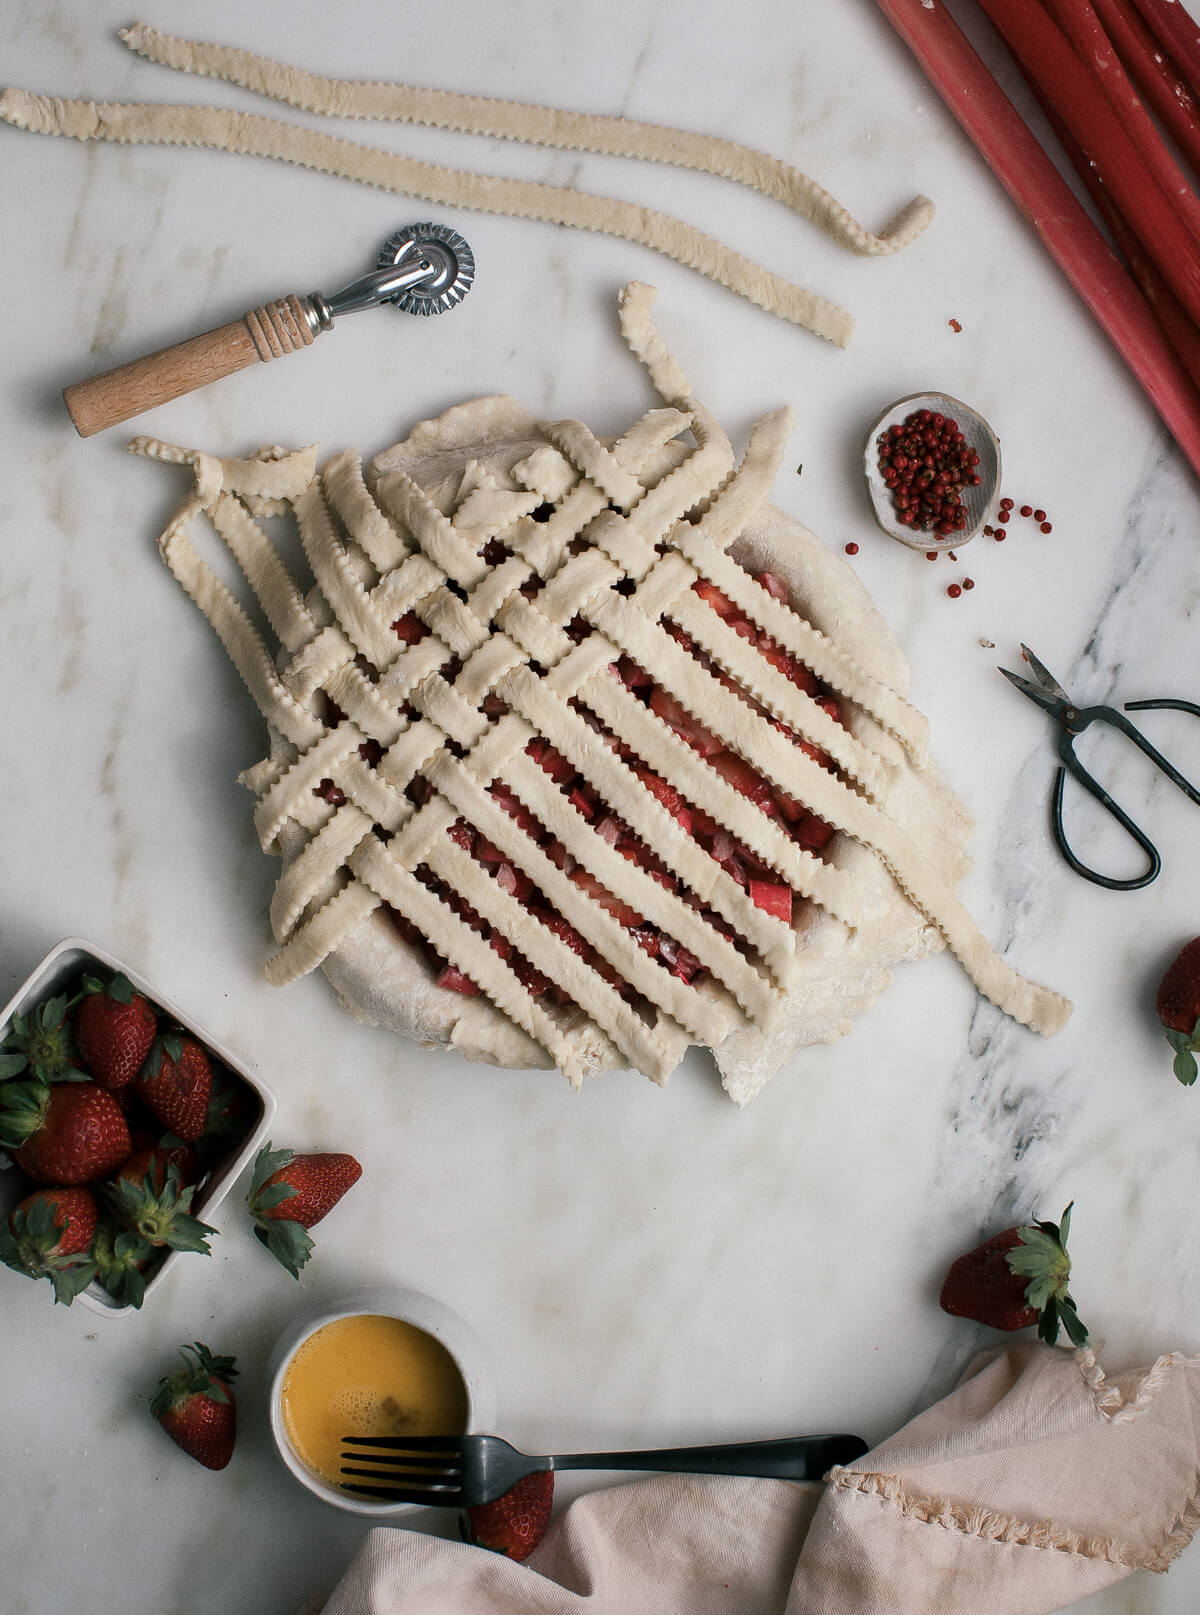 Process shot of an unbaked pie with a lattice crust.